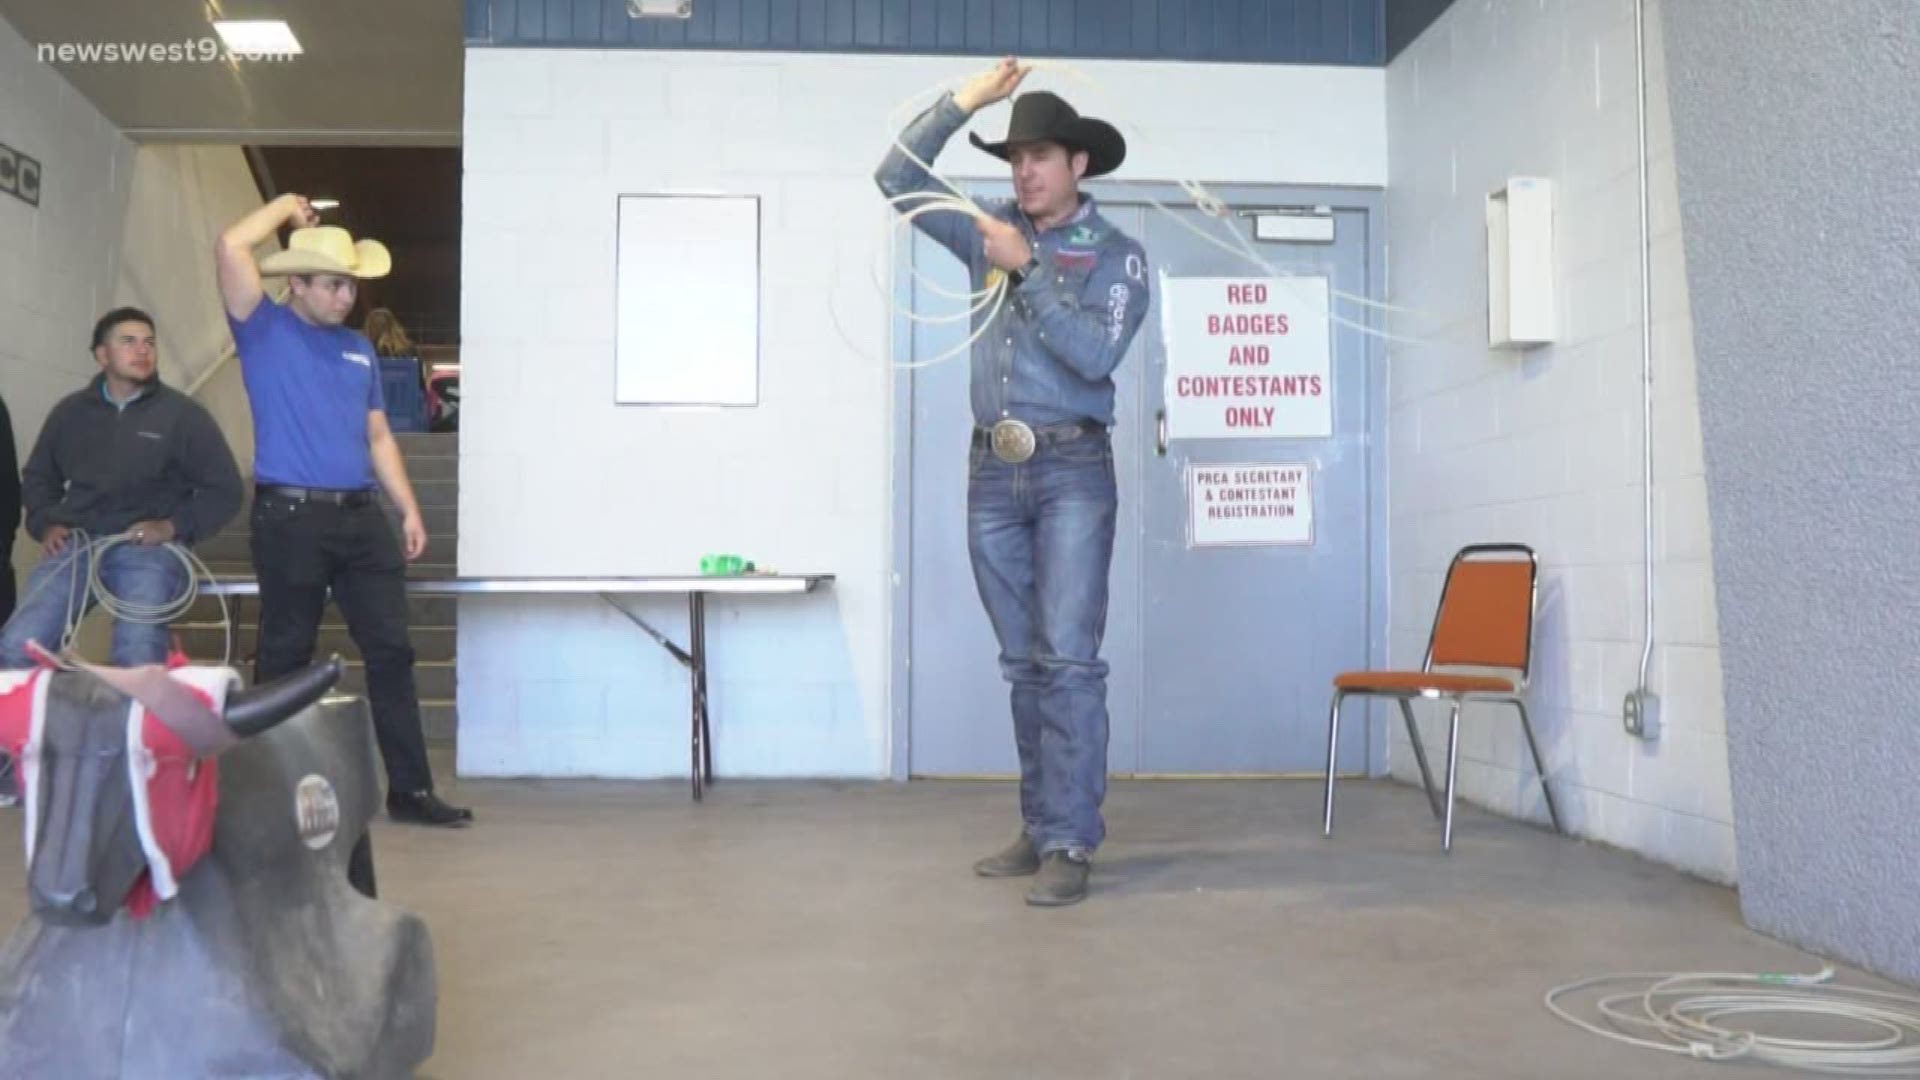 Two-time World Champion roper and Midland native Patrick Smith teaches NewsWest 9 Sports reporter Eliav Gabay how to rope.